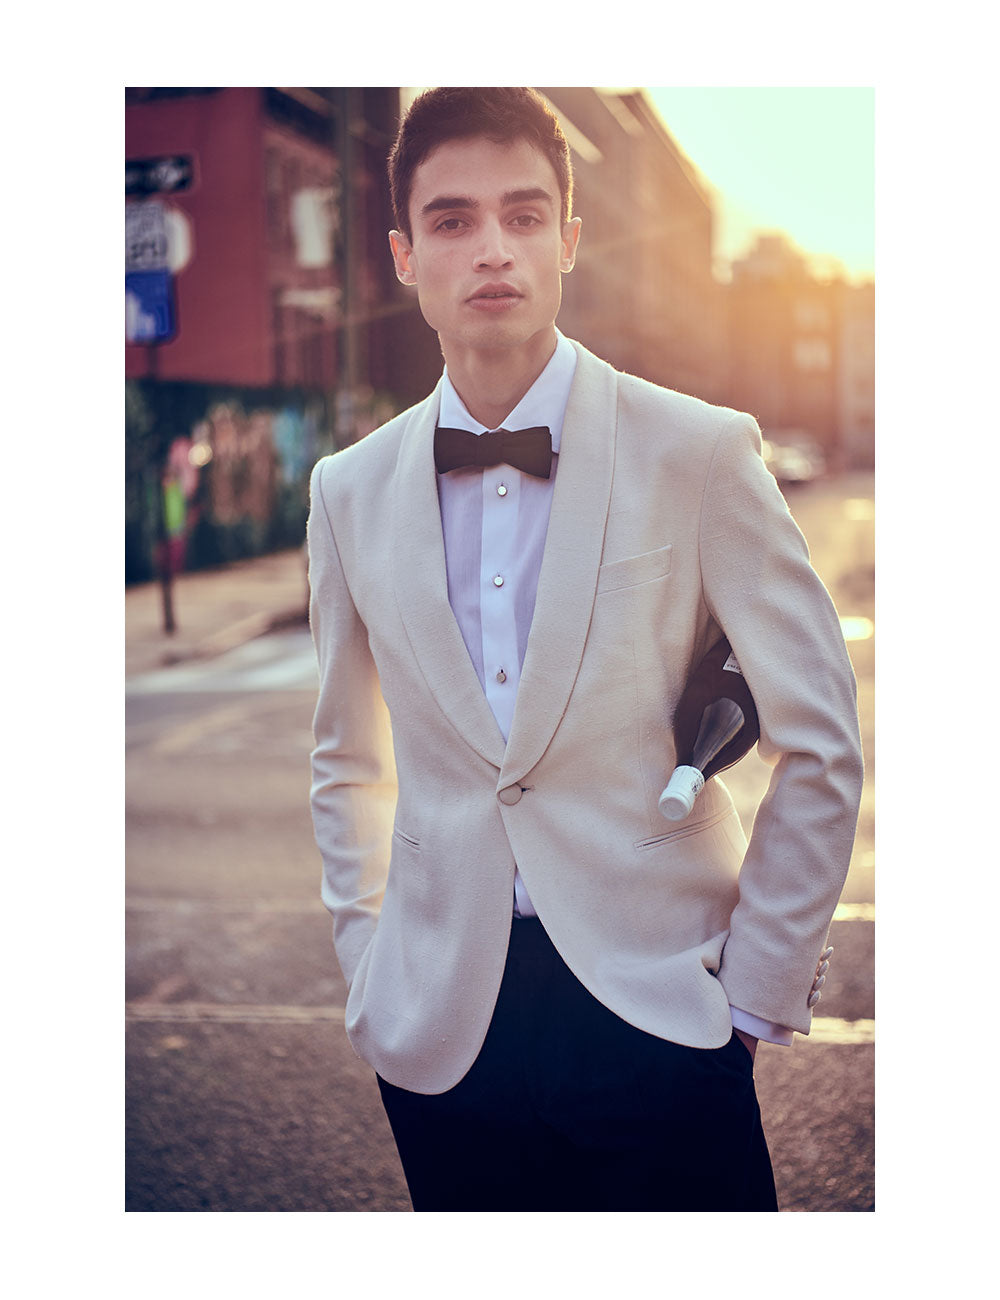 Model wearing an ivory dinner jacket, white dress shirt with mother of pearl shirt studs, black bow tie, and black tuxedo pants. He is holding a bottle of wine under his arm and standing on NYC street.